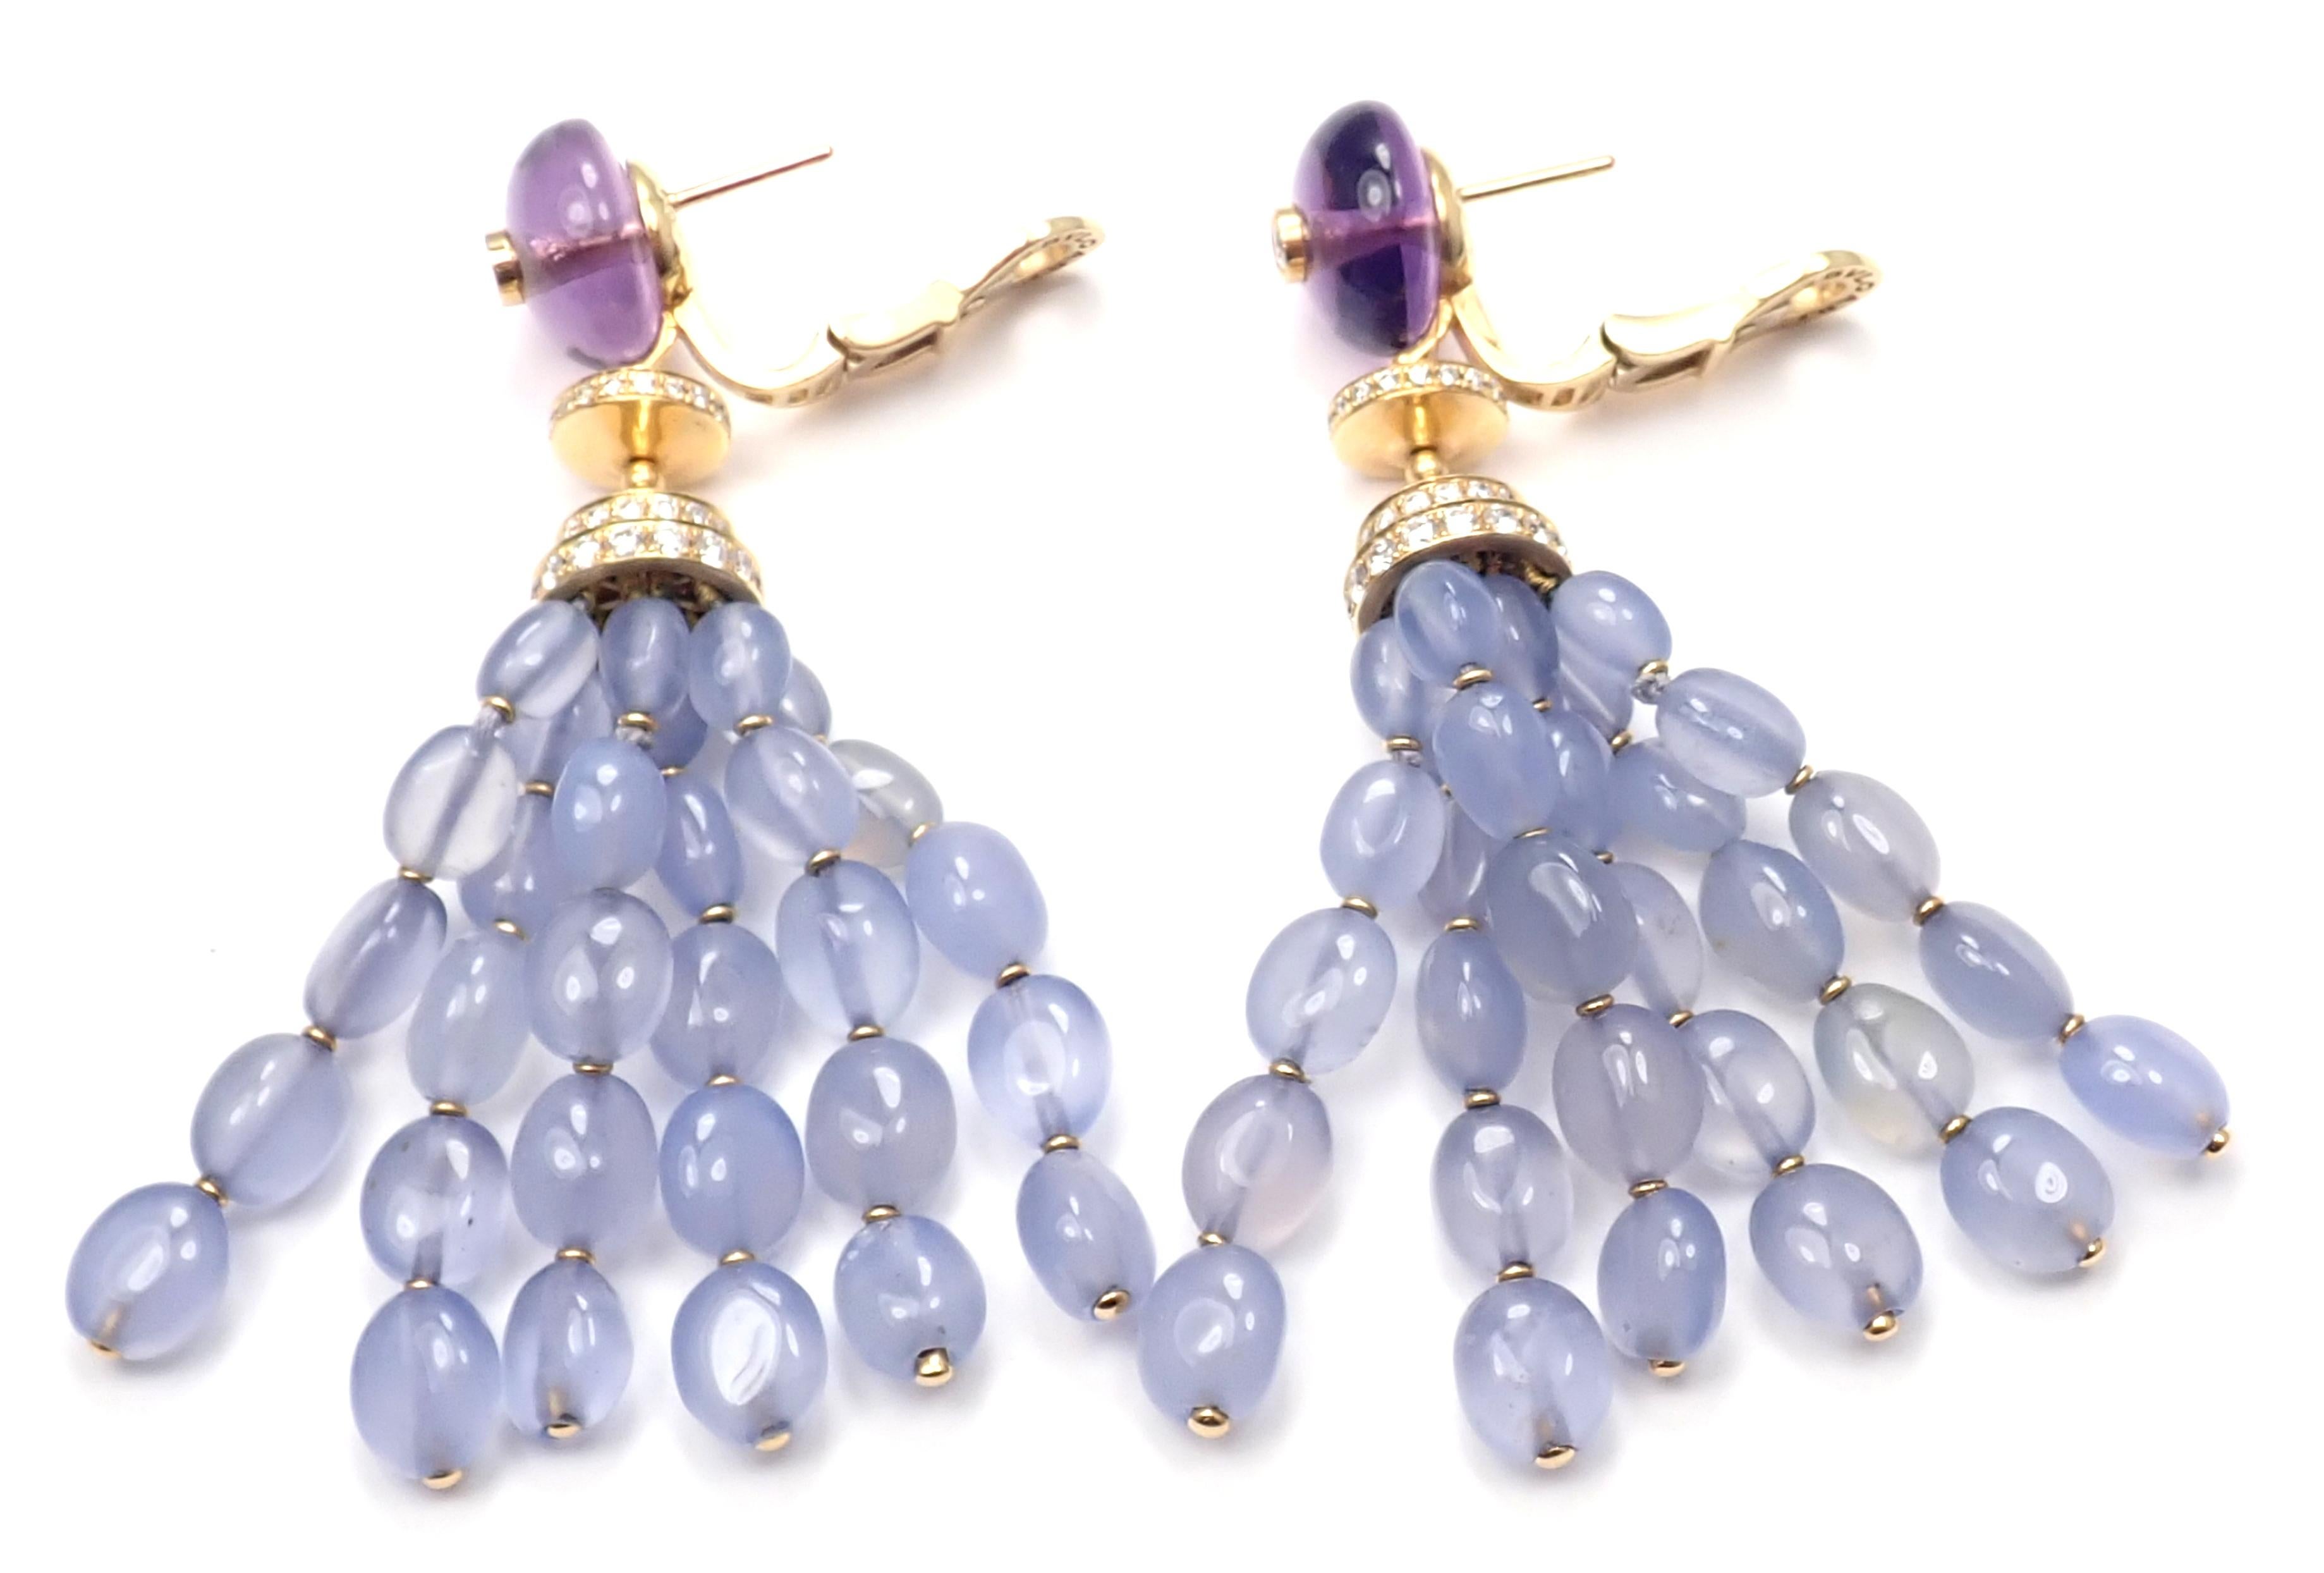 18k yellow gold diamond, Chalcedony, Amethyst drop earrings by Bulgari.
Round brilliant cut diamonds VS1 clarity G color total weight approx. 1.5ct
2 Amethyst stones
Chalcedony stones
Detail:
Measurements: 2.5